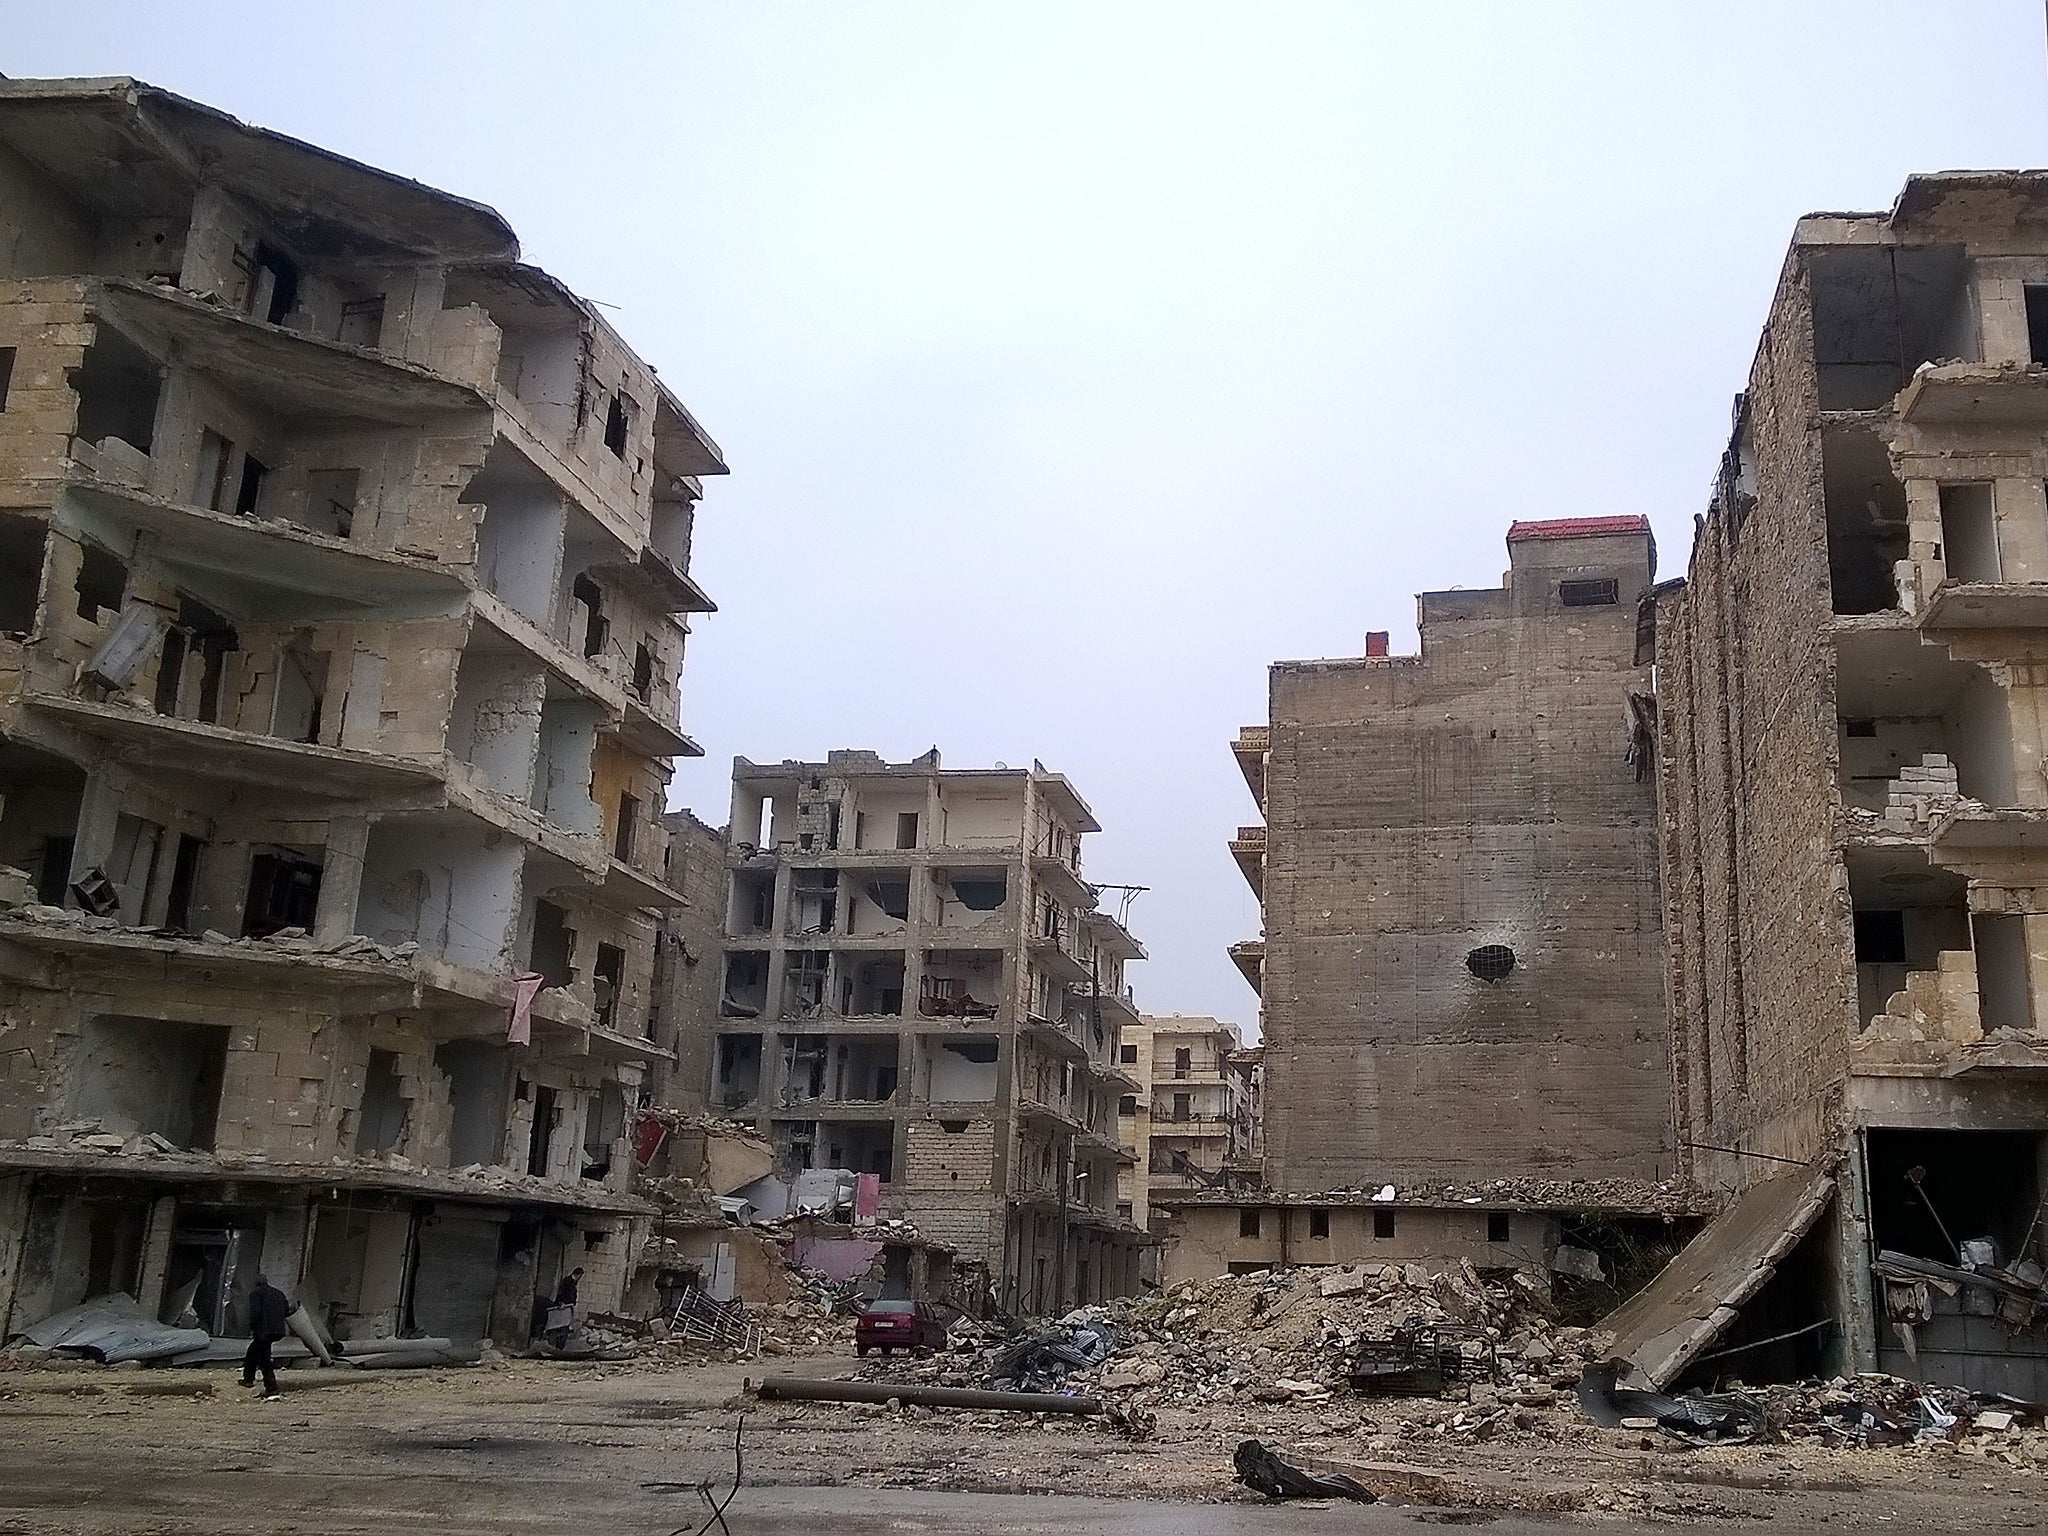 War-torn buildings in the city of Aleppo